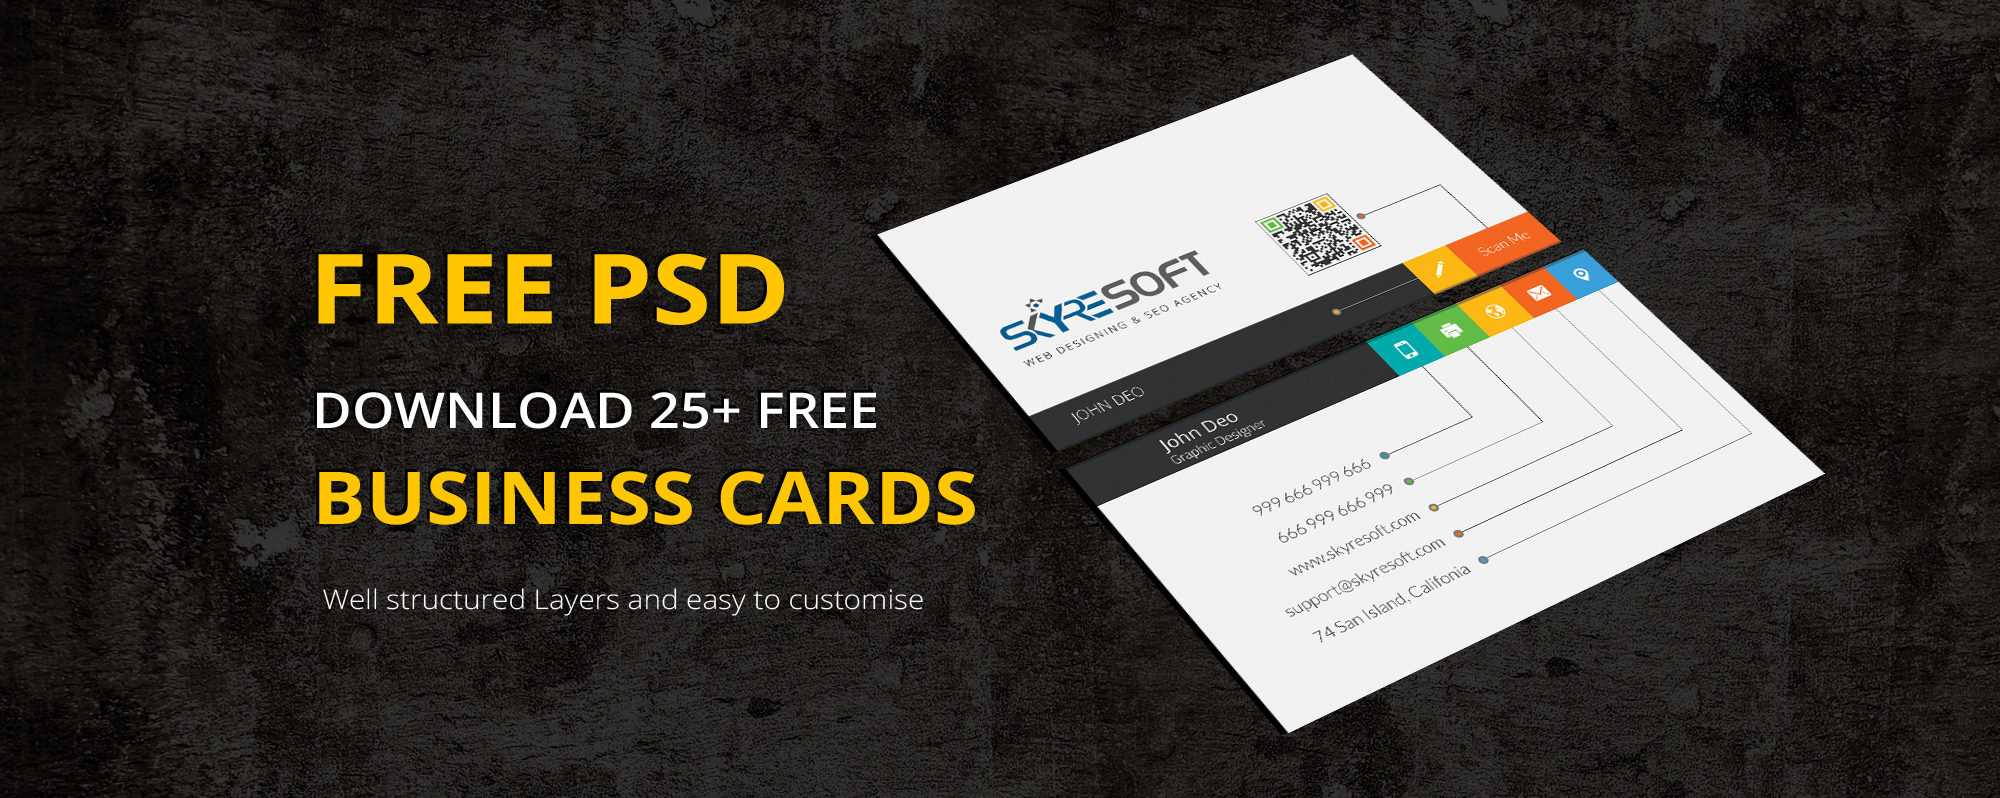 25 Creative Free Psd Business Card Templates 2019 Throughout Web Design Business Cards Templates